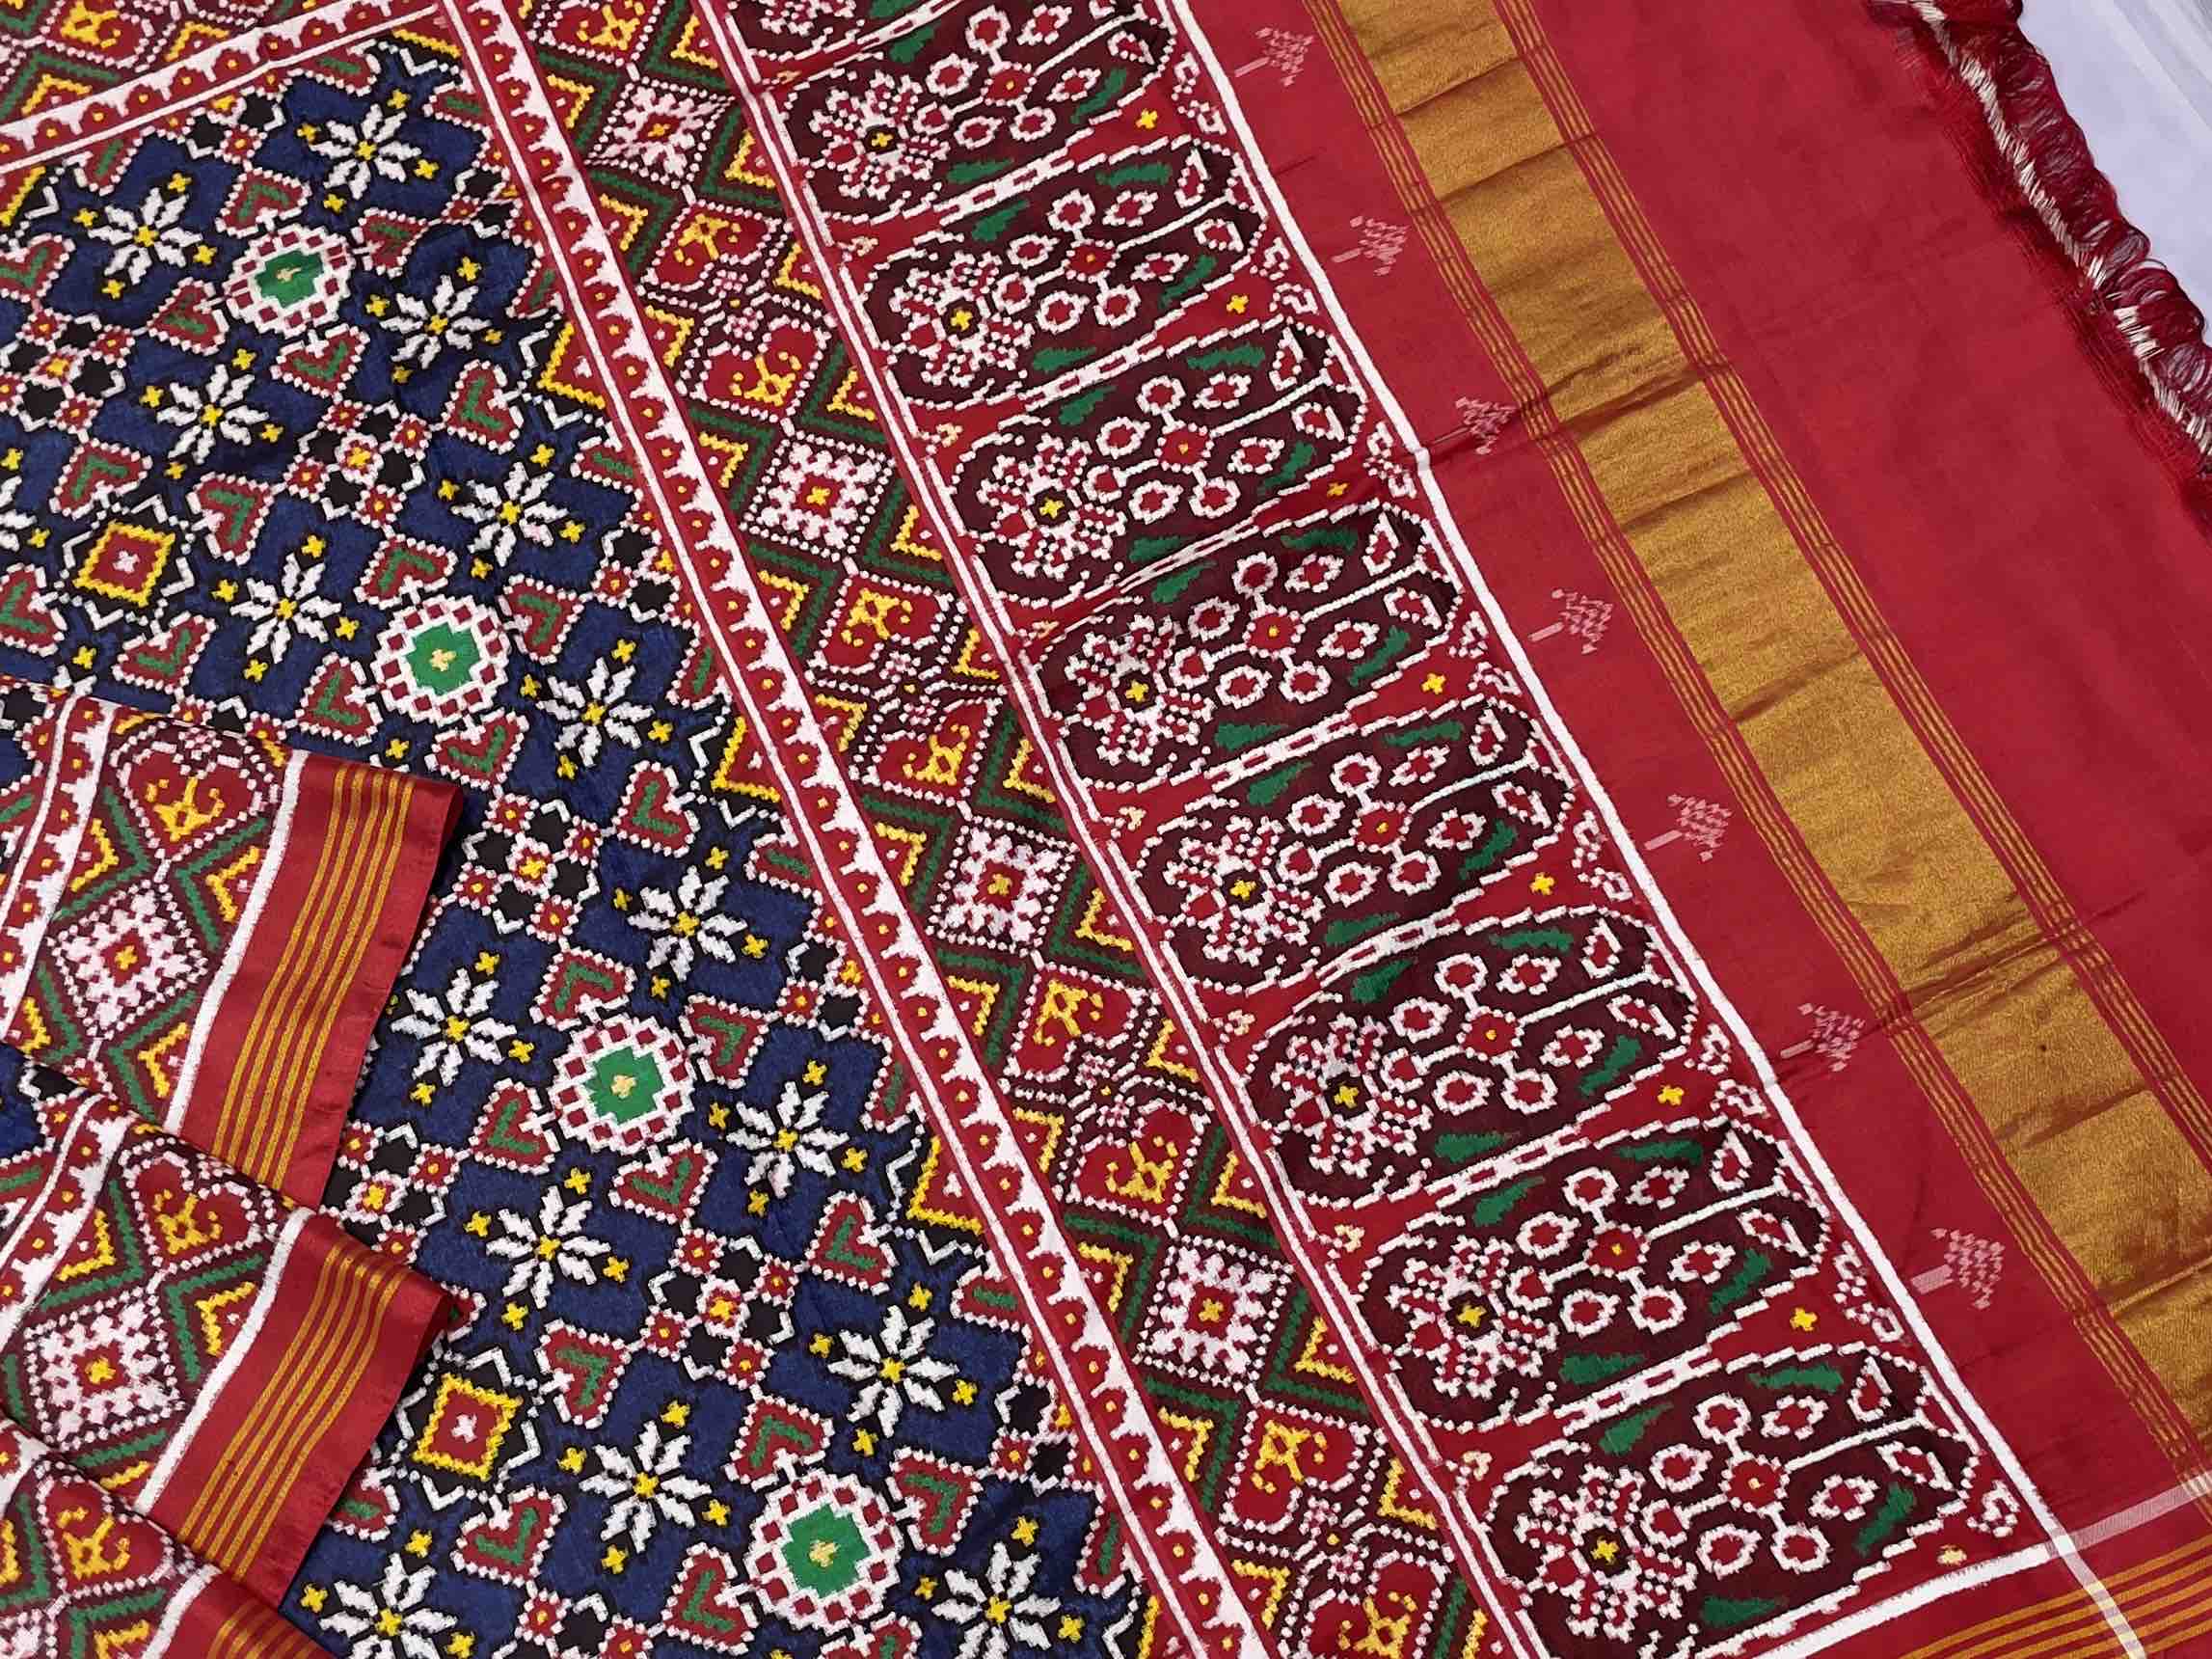 Blue and red new manekchowk design double ikat patola saree - SindhoiPatolaArt